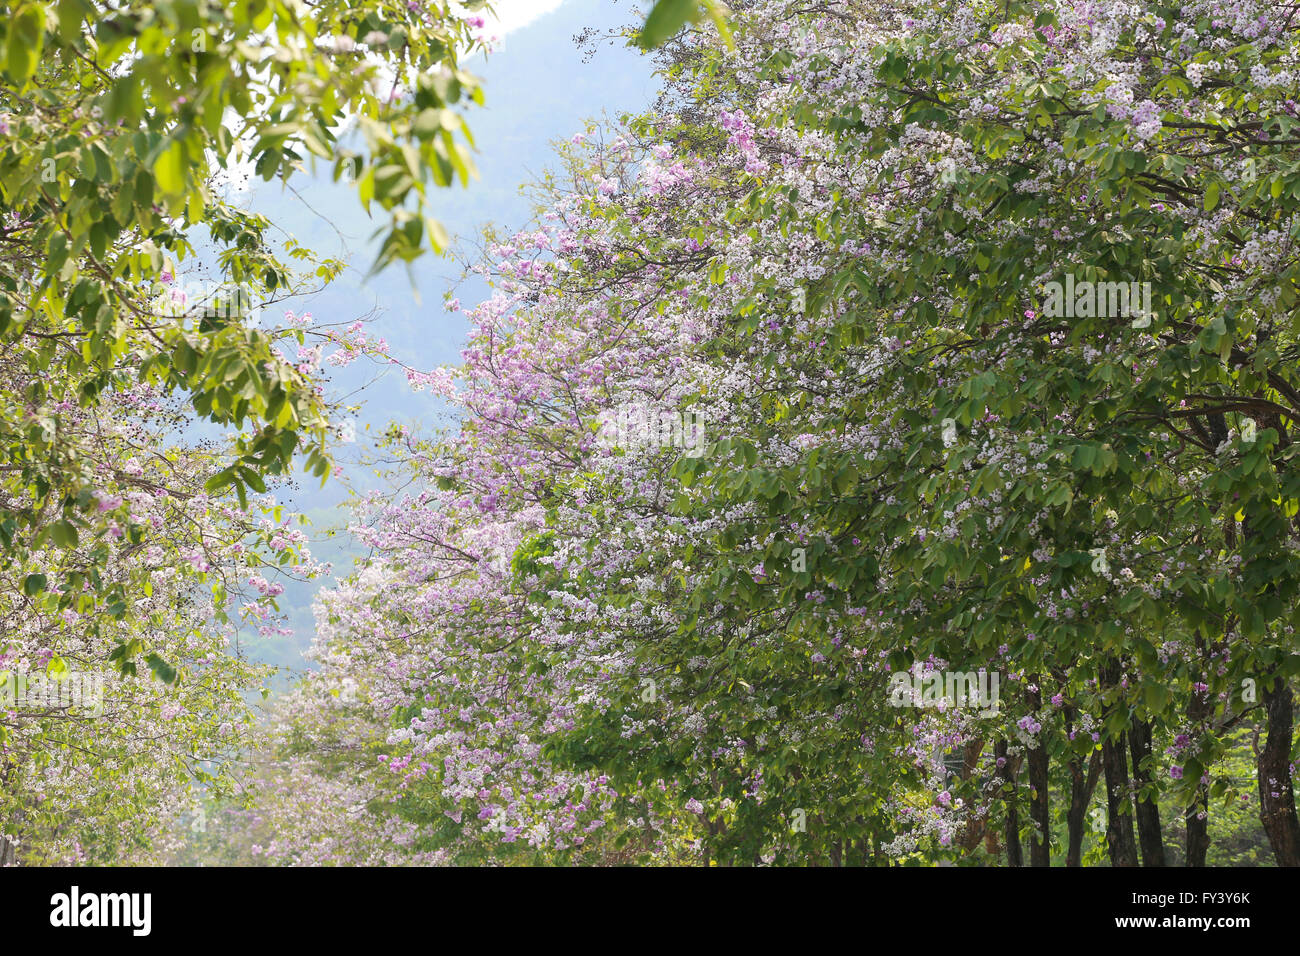 Lagerstroemia speciosa or tabak tree in Thailand,Perennial plant bloom one time per year. Stock Photo